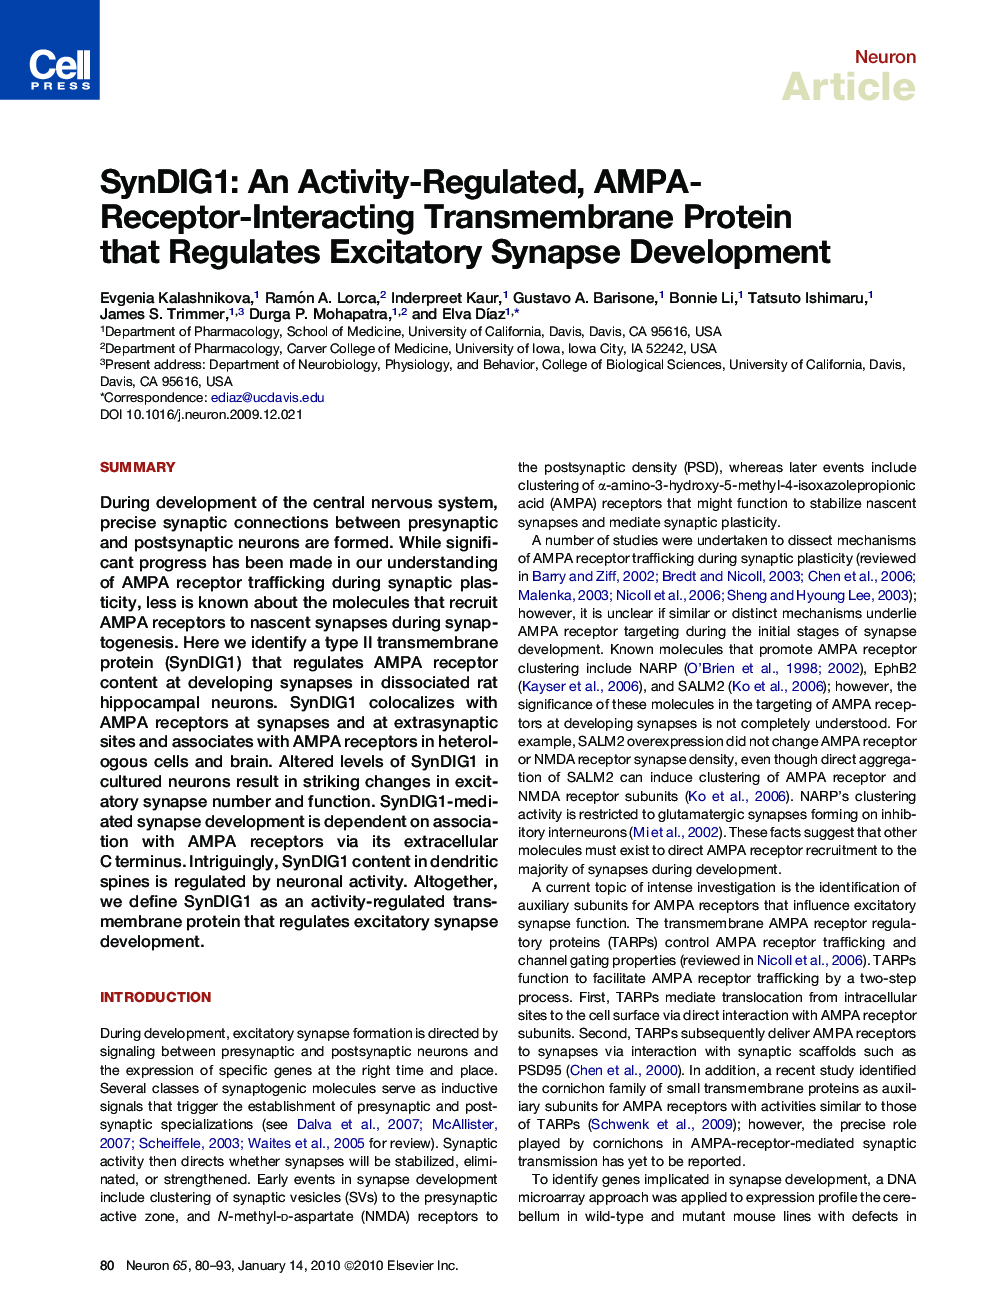 SynDIG1: An Activity-Regulated, AMPA- Receptor-Interacting Transmembrane Protein that Regulates Excitatory Synapse Development